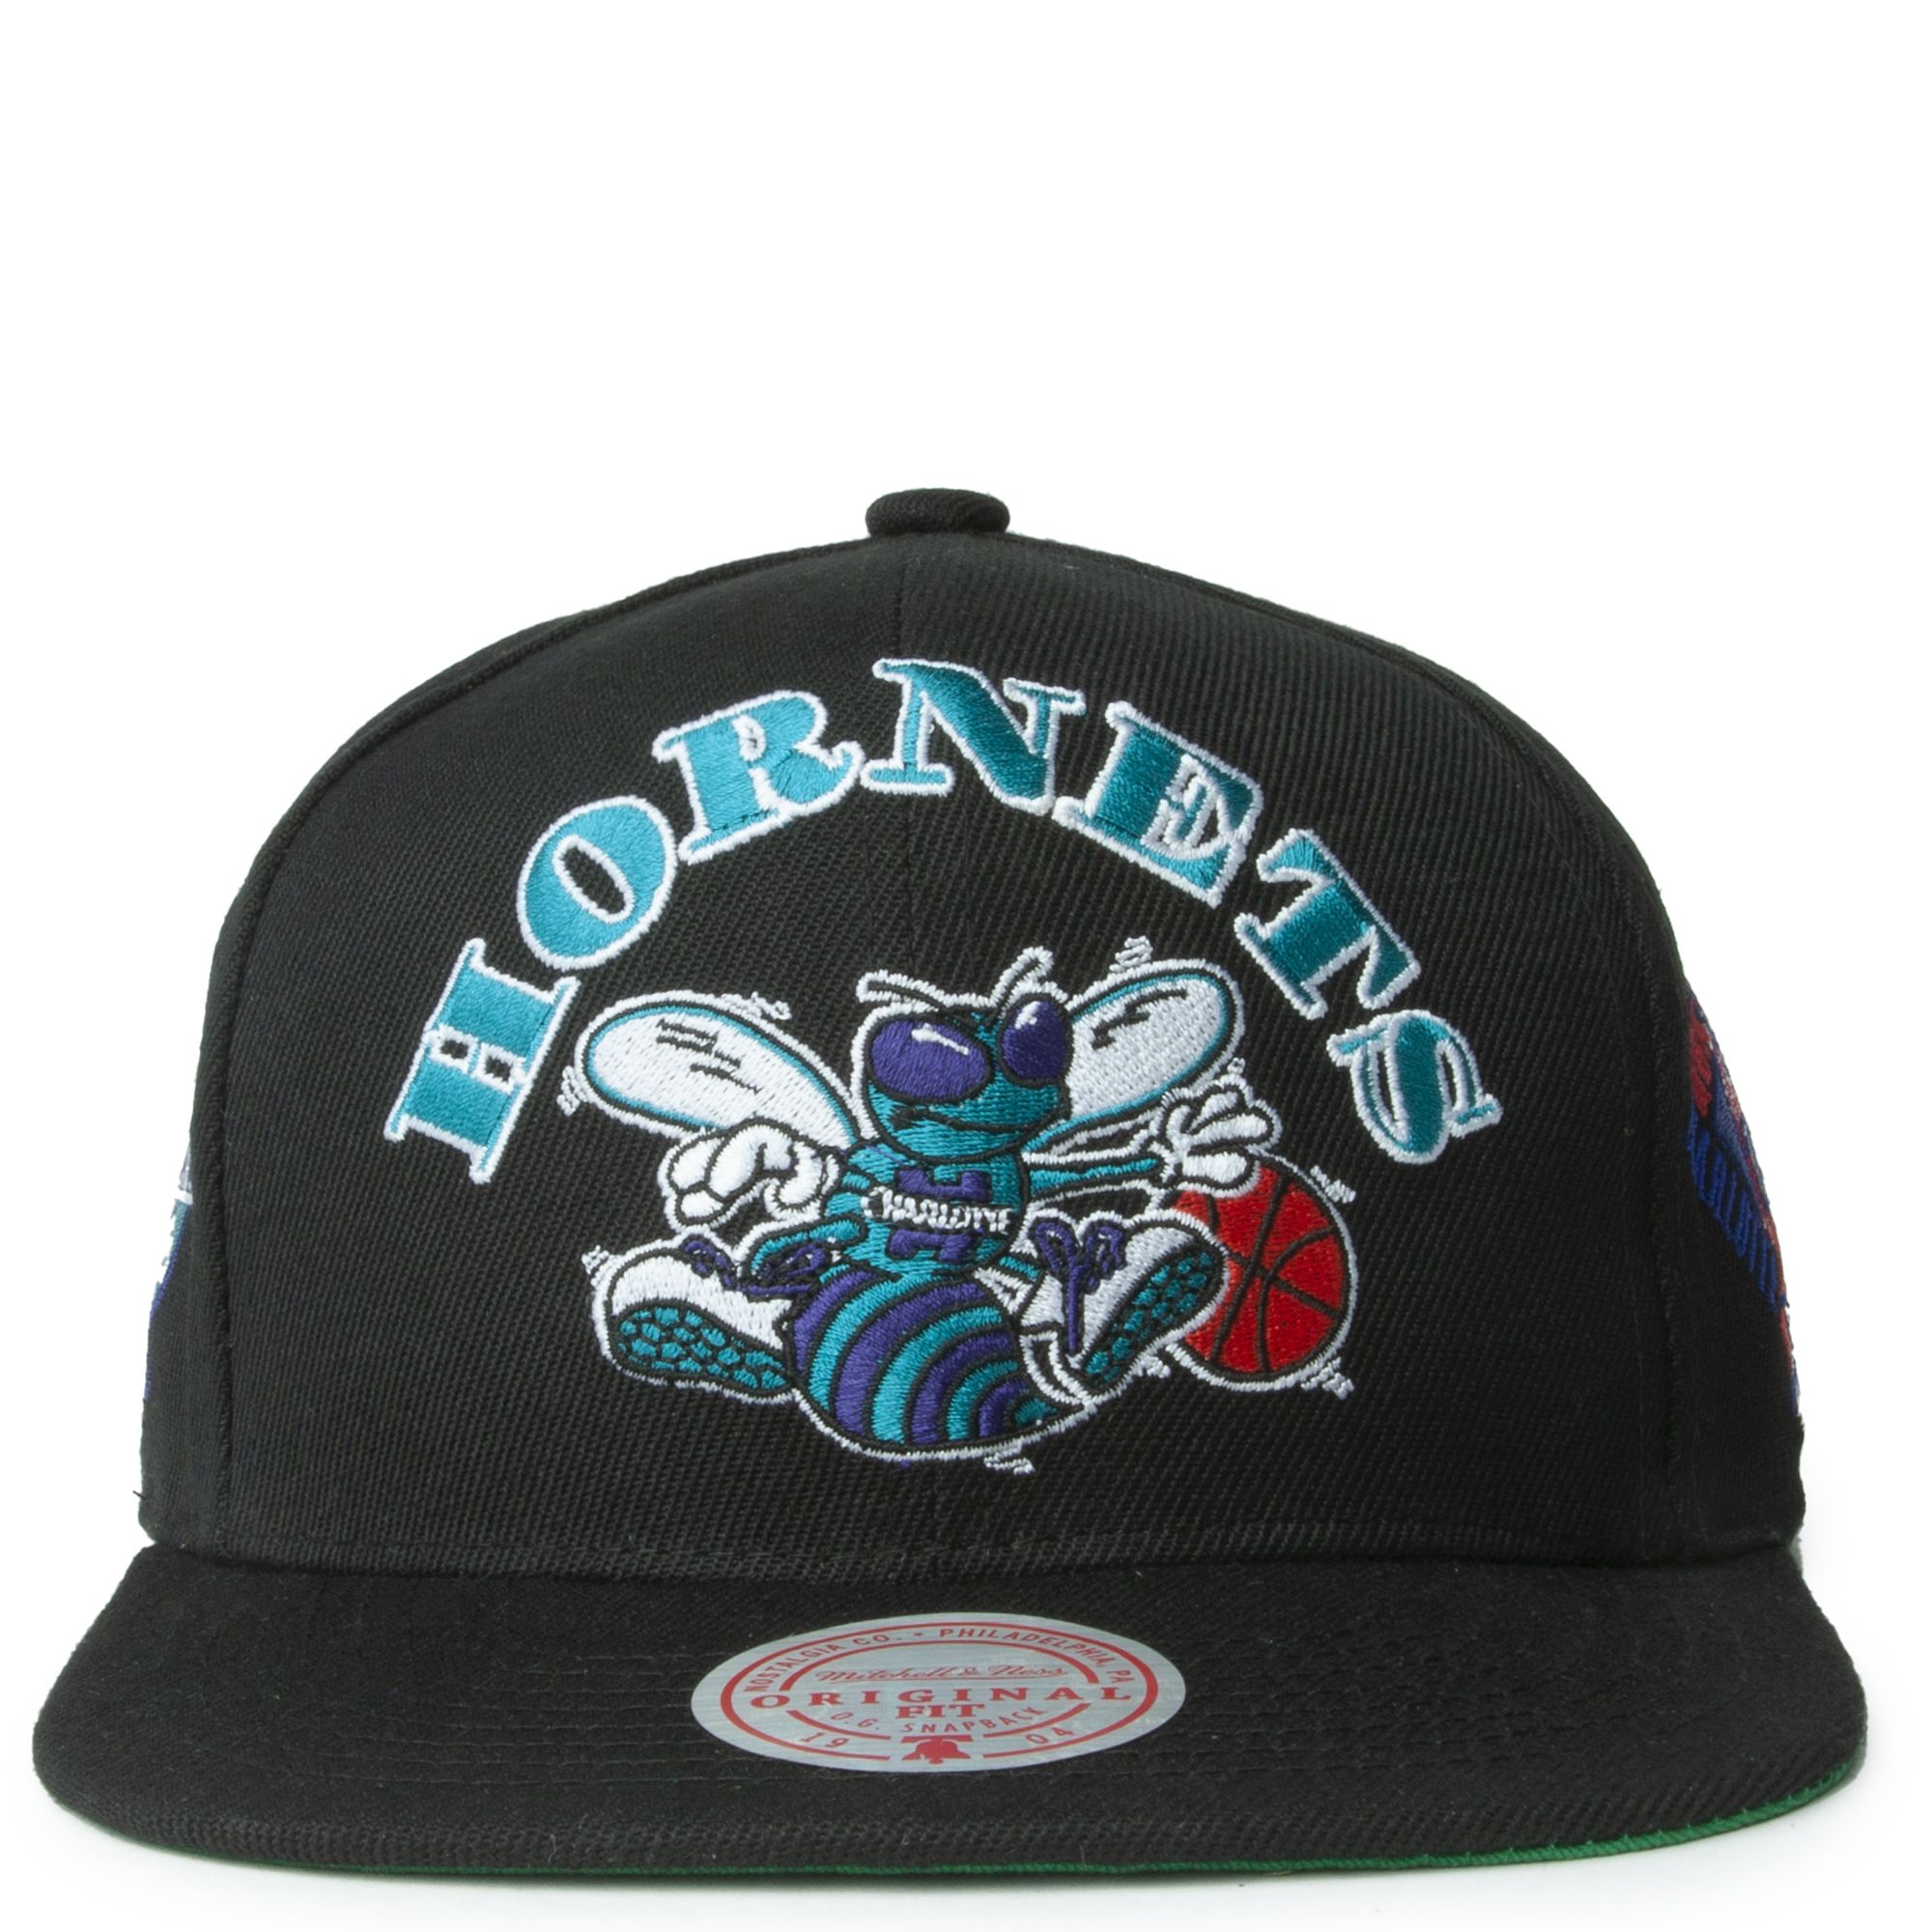 charlotte hornets mitchell and ness cap